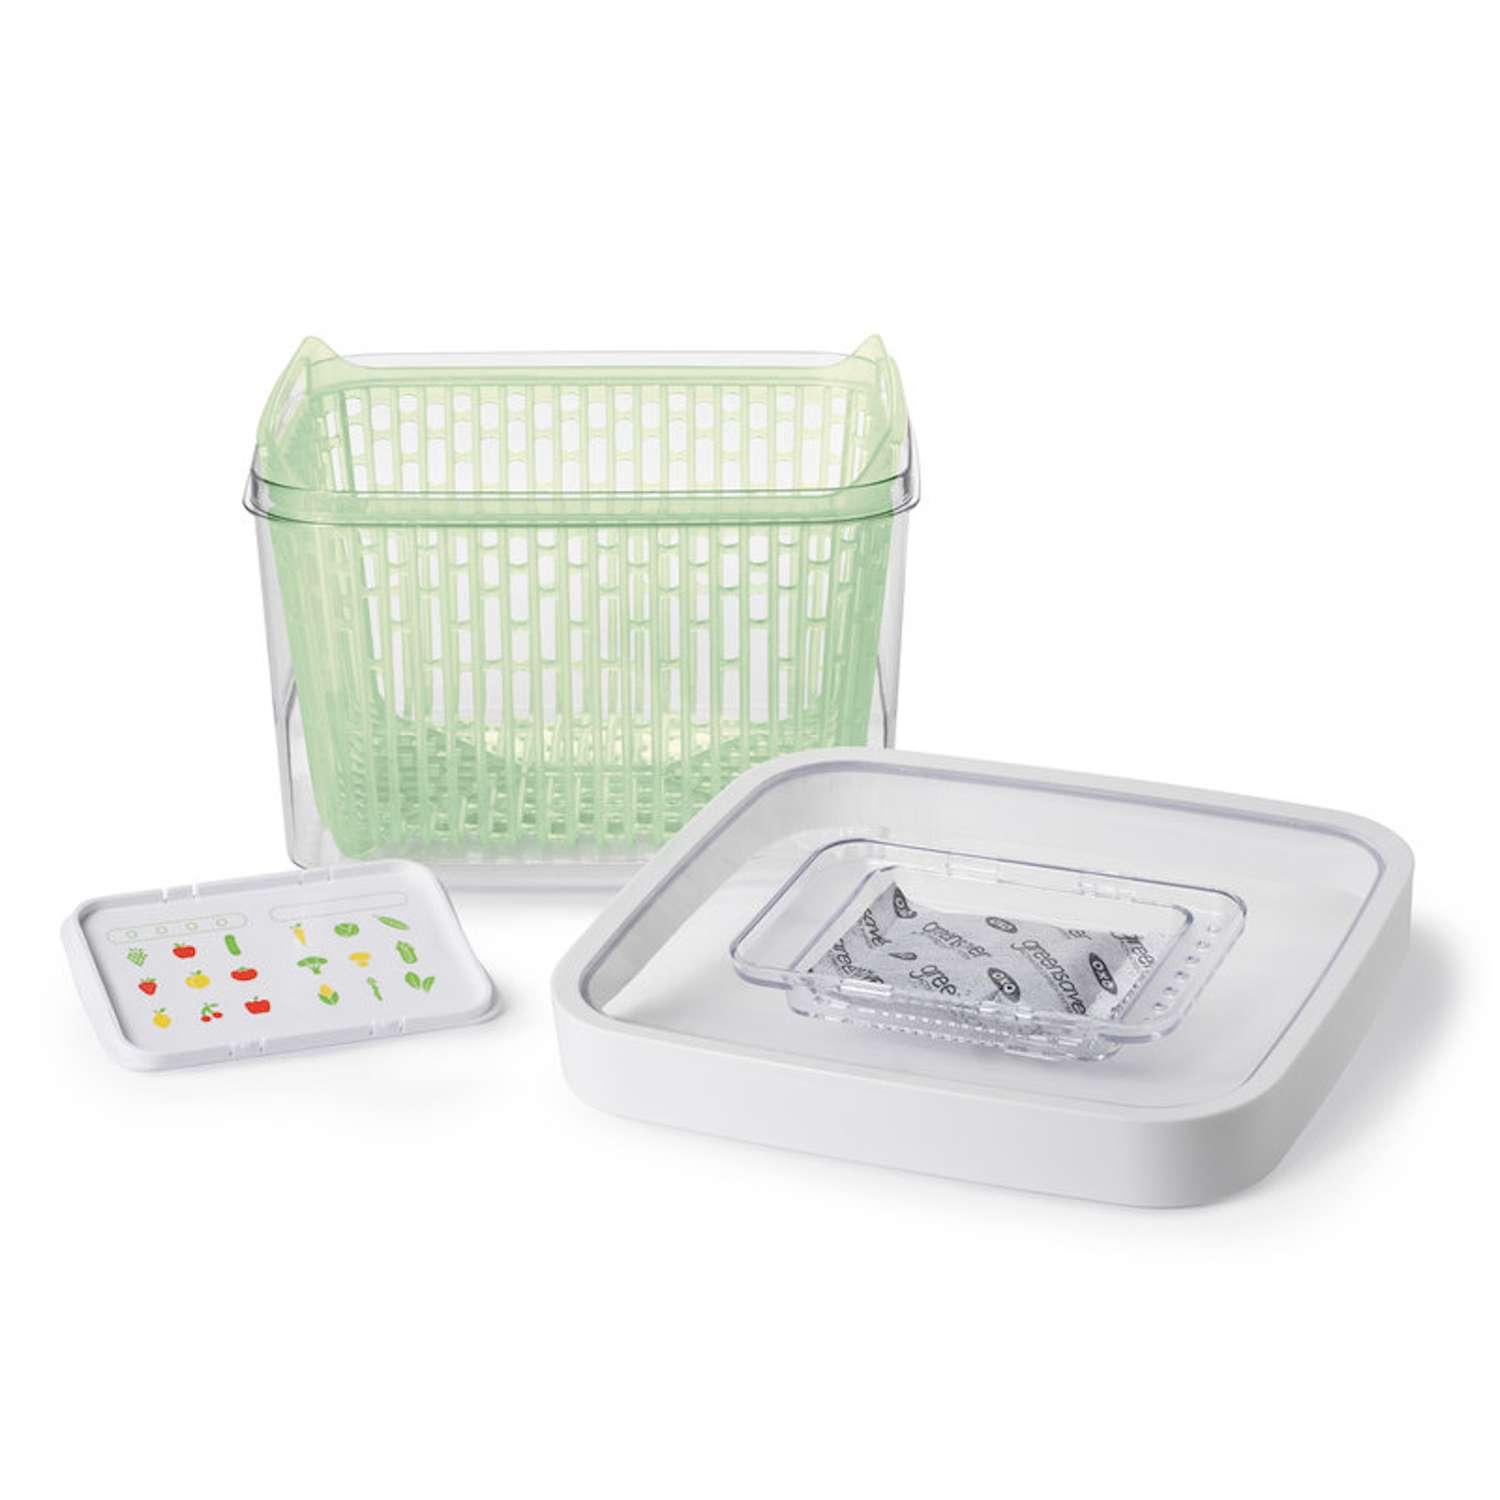 OXO Greensaver Produce Keeper - Clear/Green, 4.3 qt - King Soopers